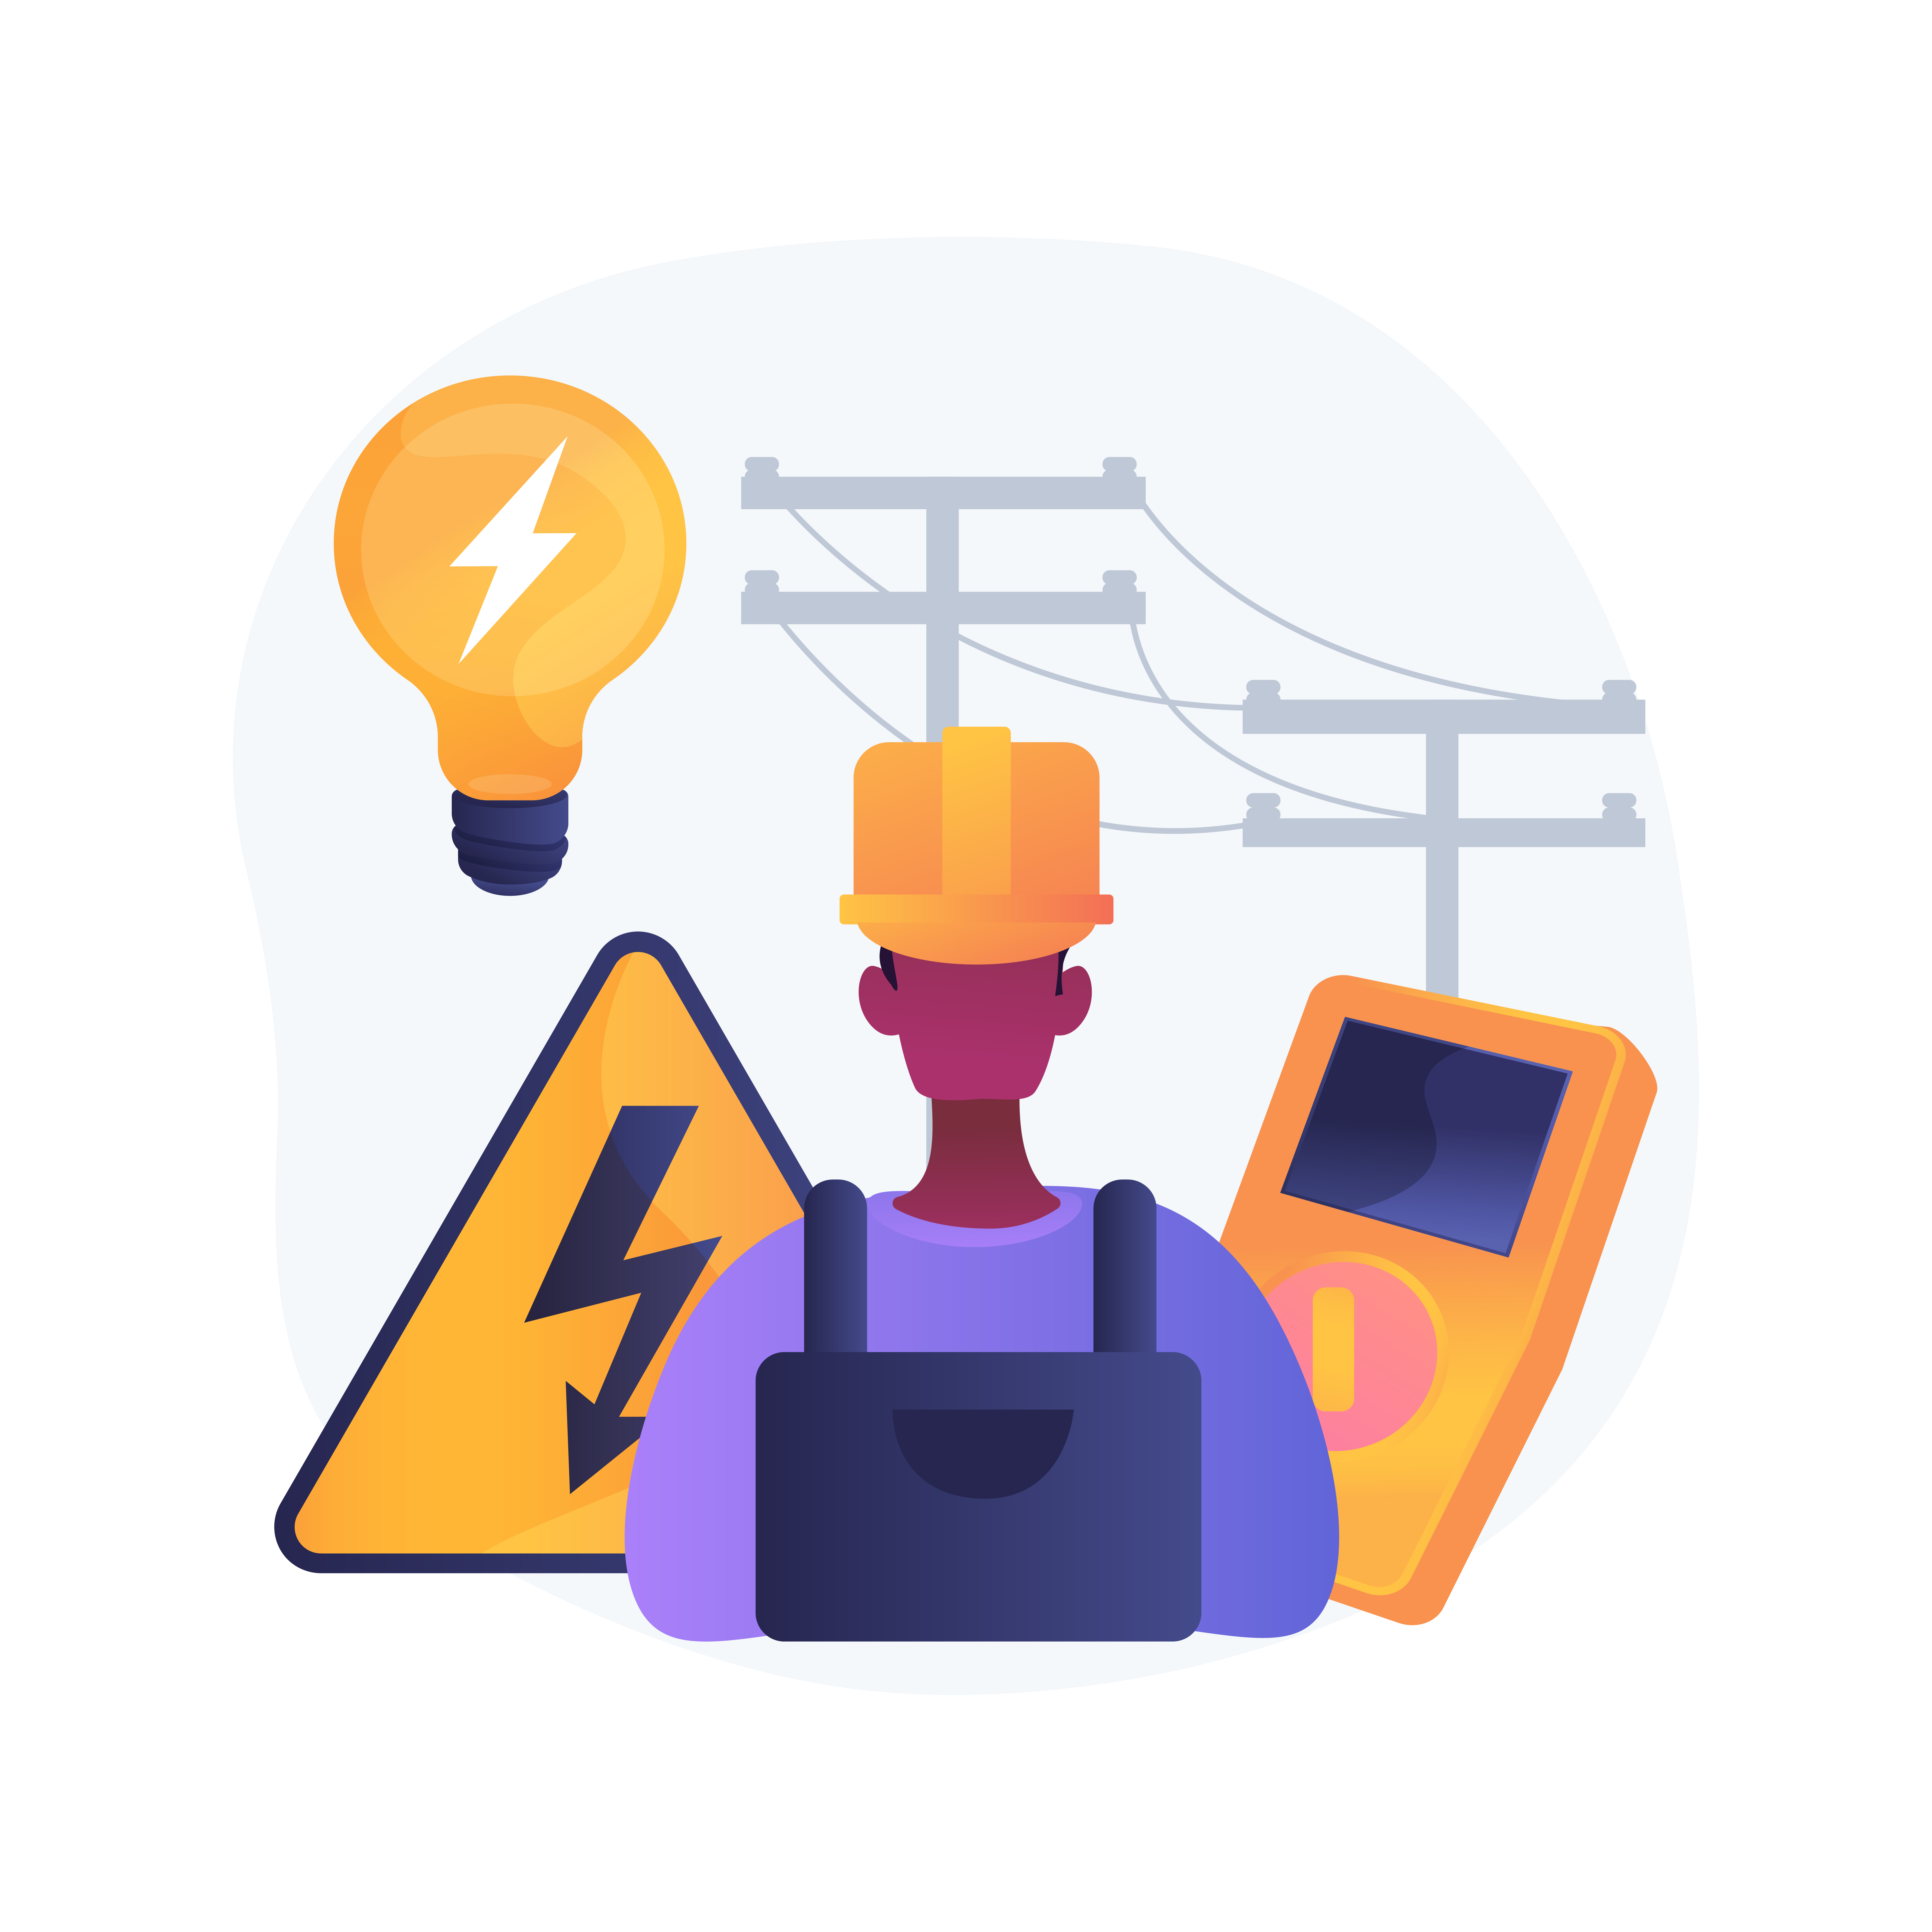 Electrician services abstract concept vector illustration. Energy-efficient lighting, electrical system maintenance and inspection, home automation, electric heater repair abstract metaphor.